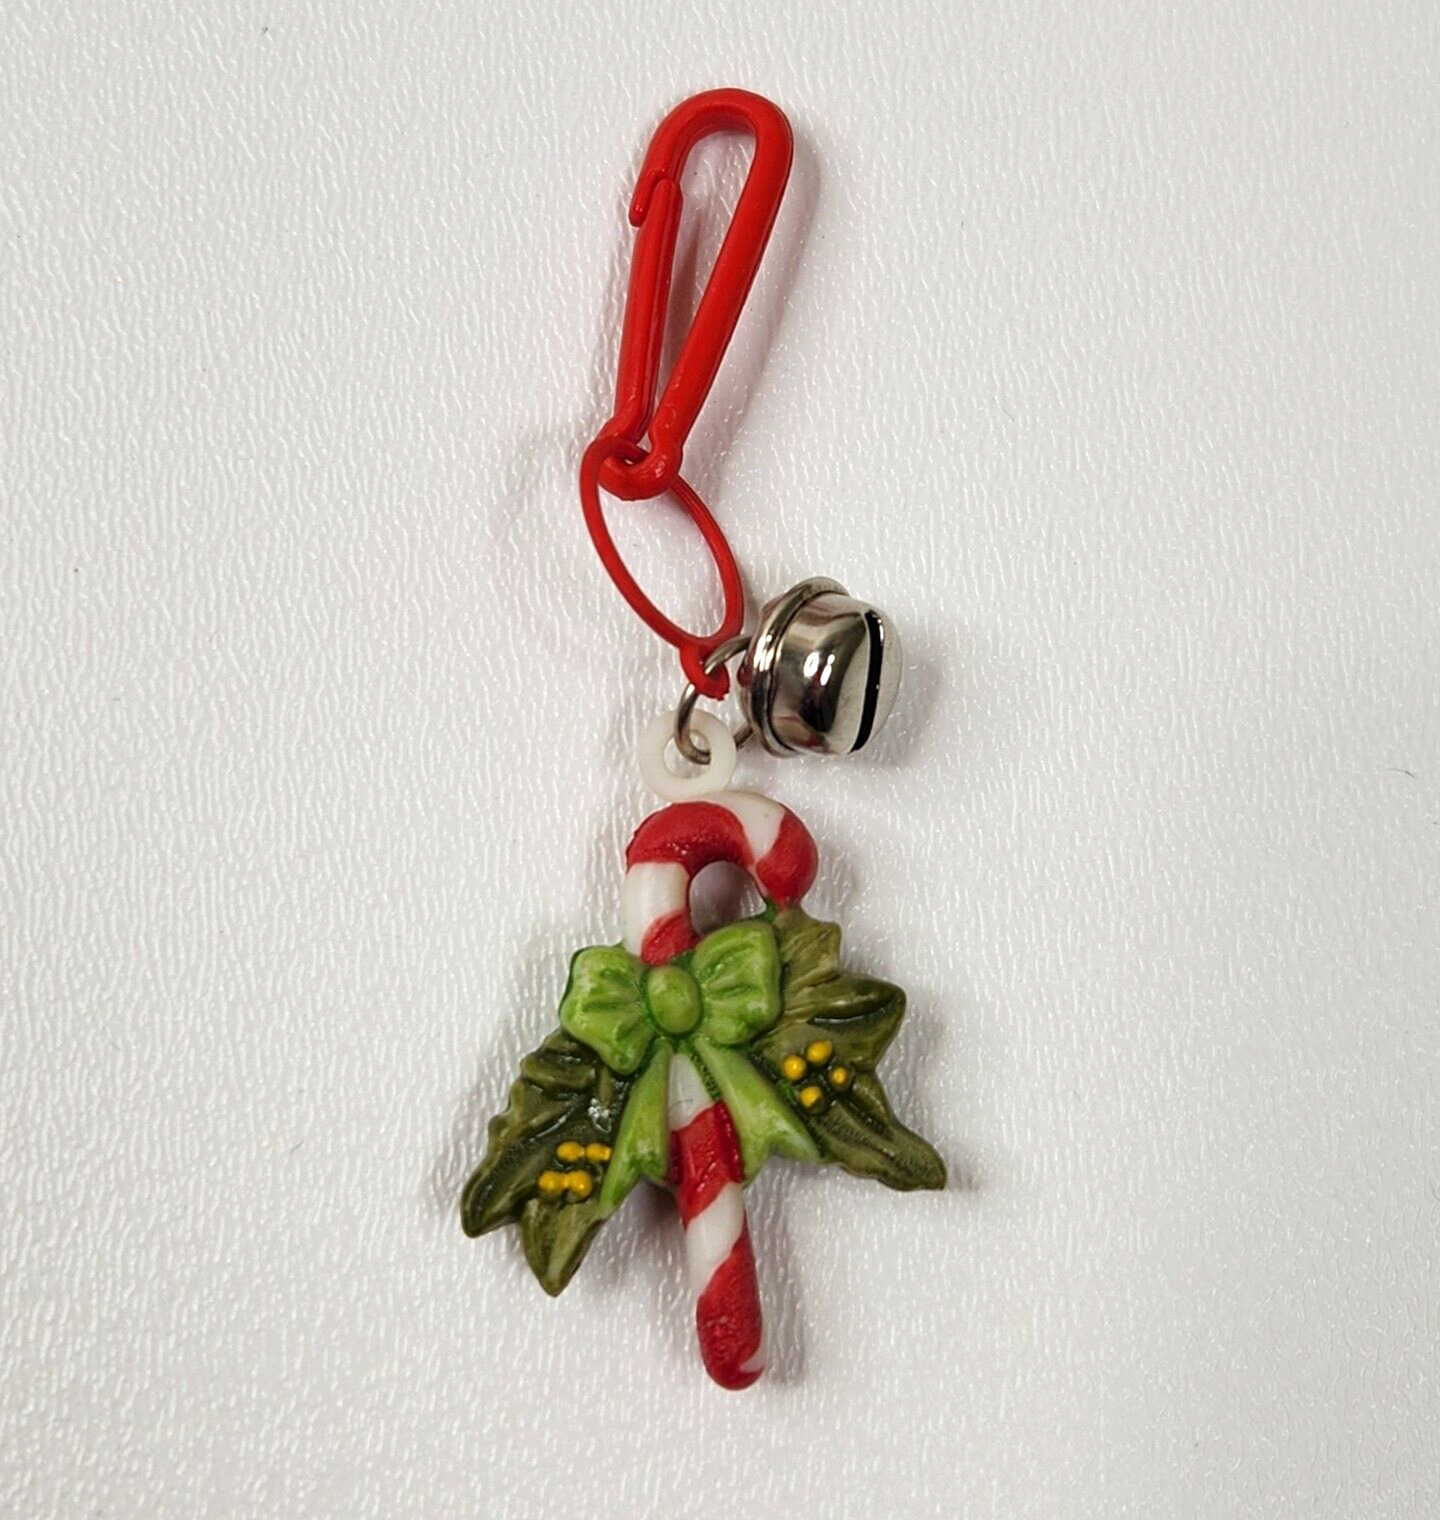 Vintage 1980s Plastic Bell Charm Candy Cane Christmas For 80s Necklace